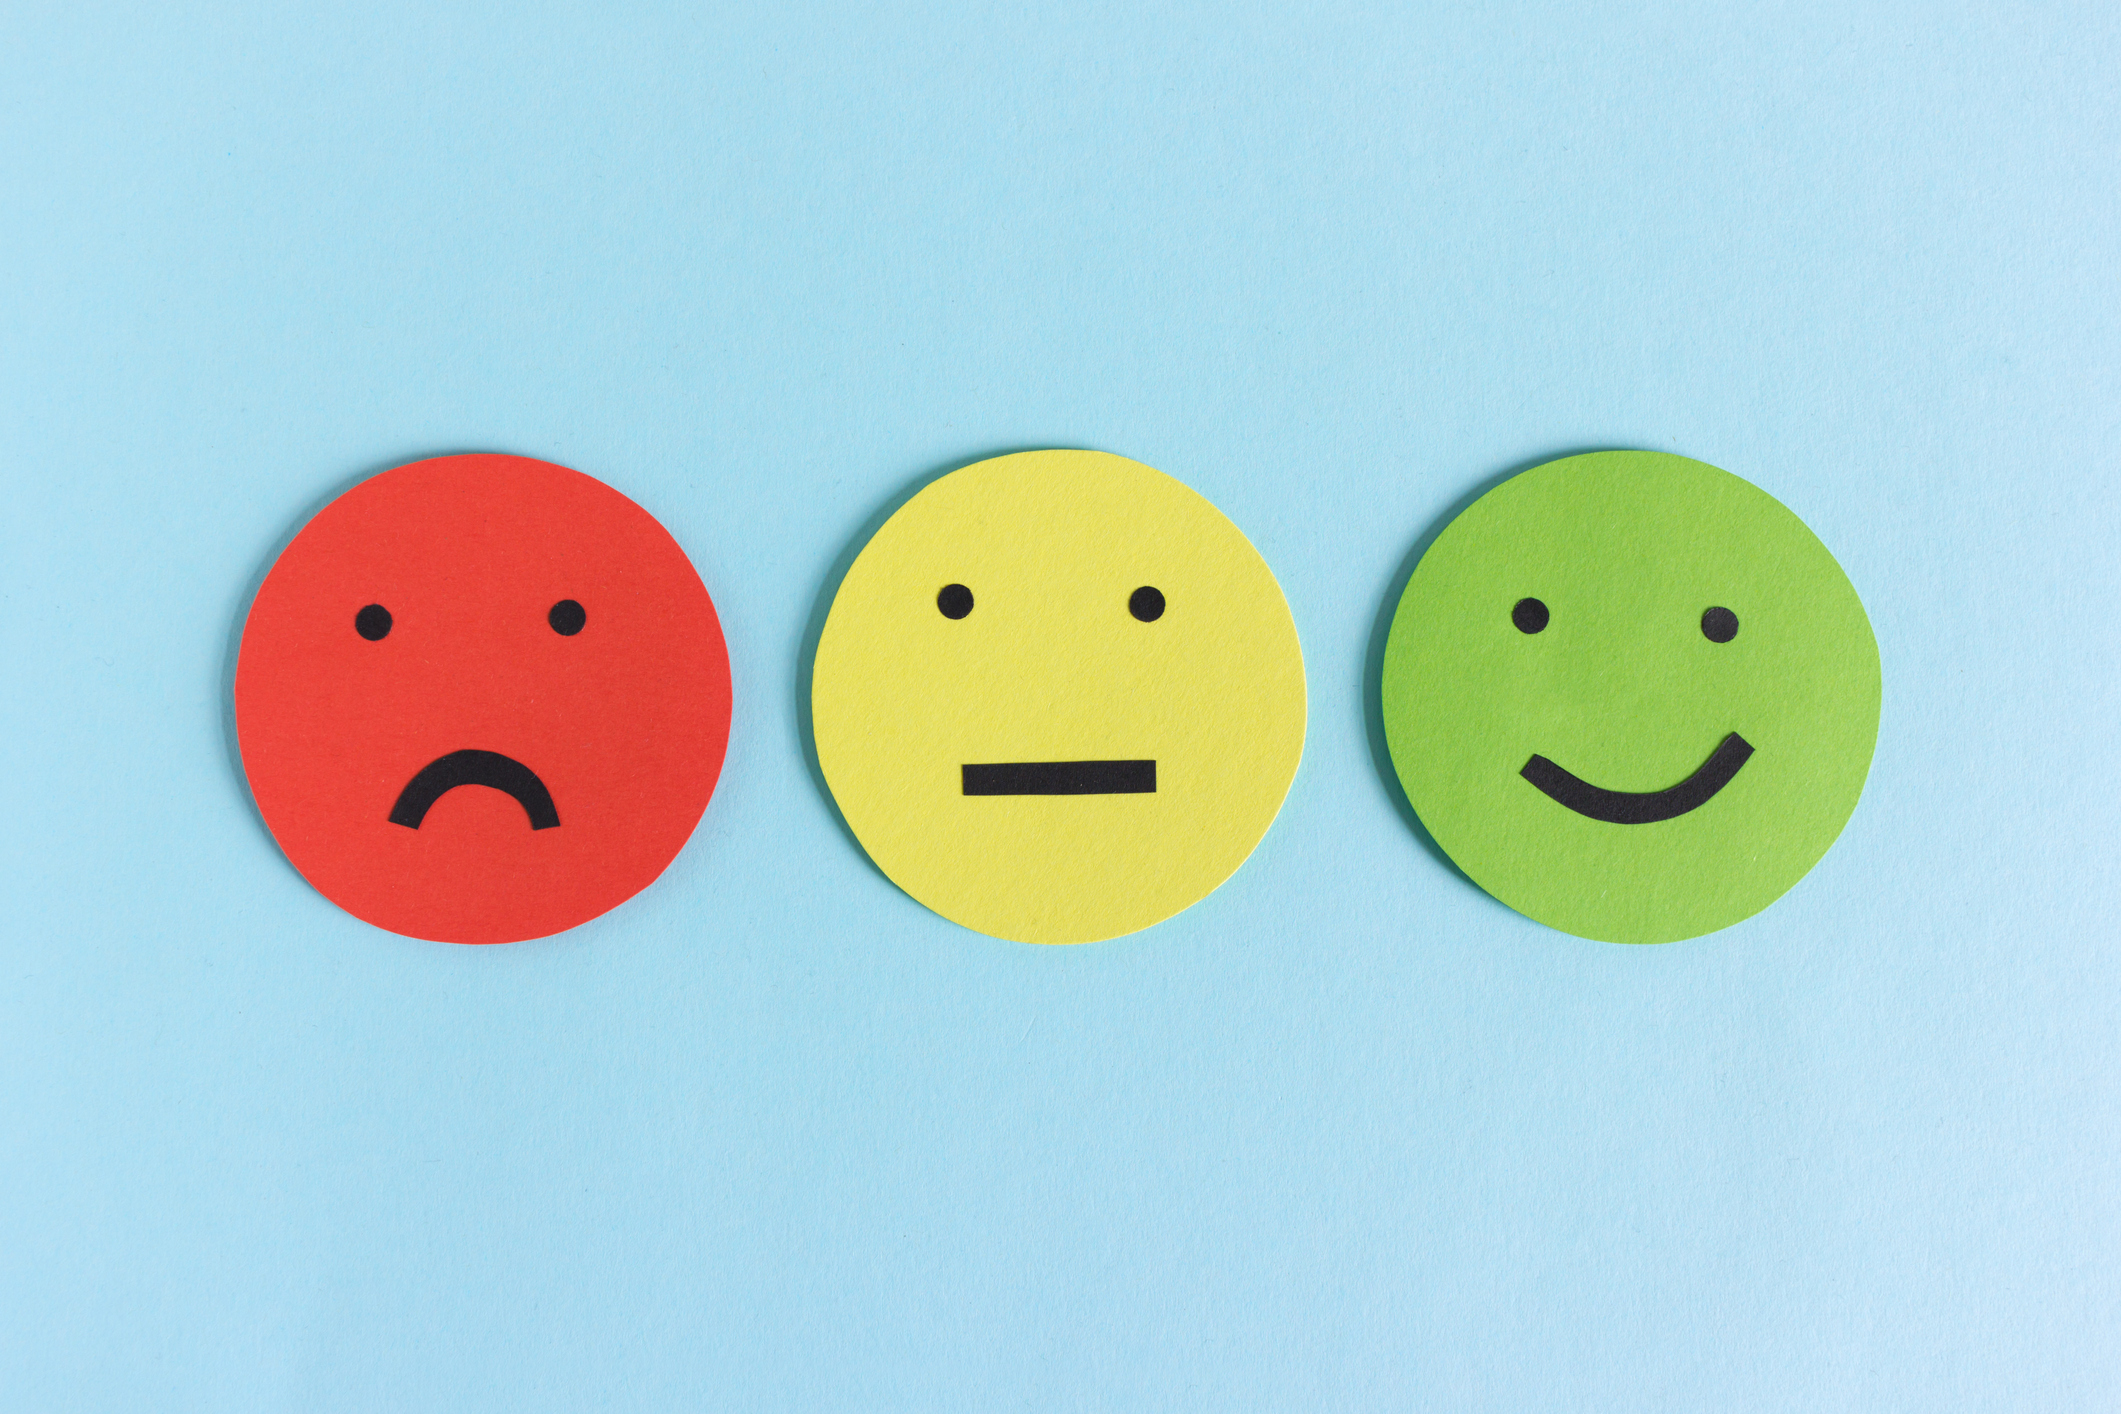 Expressing Emotions at Work Can Help You Succeed: Here's How.